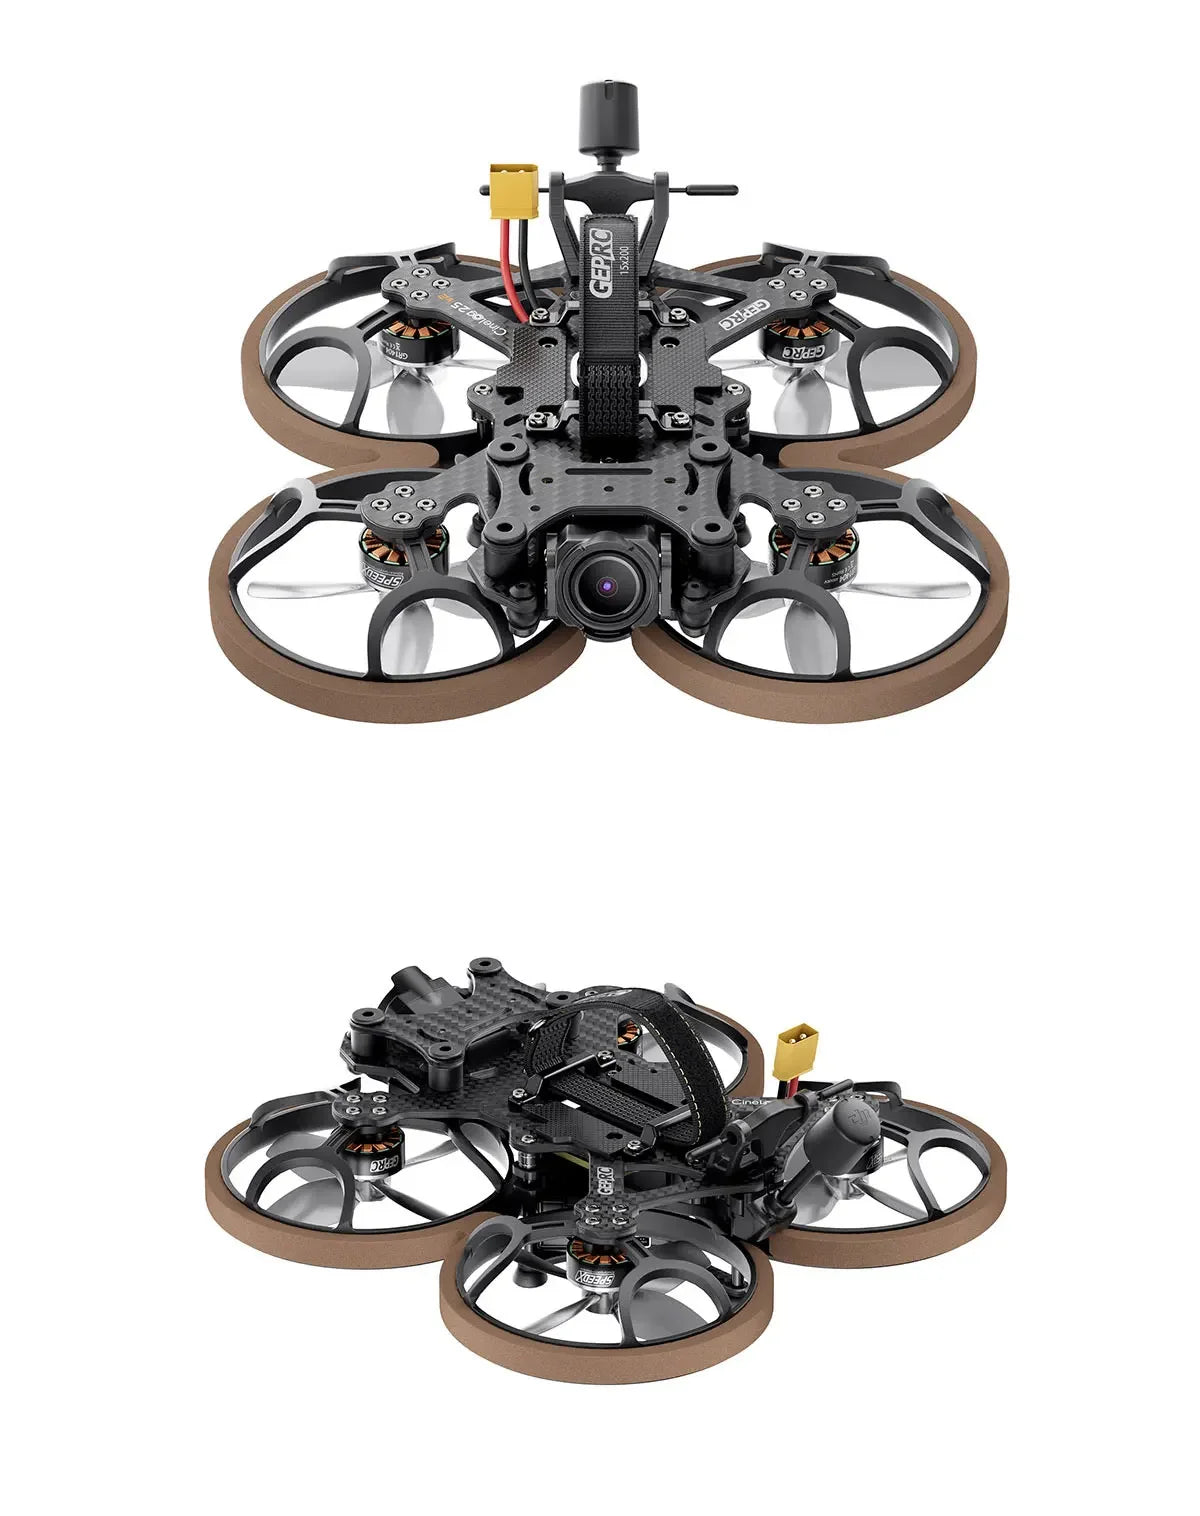 GEPRC Cinelog25 V2 Analog - FPV, the fuselage is small and compact, suitable for indoor and outdoor shooting .